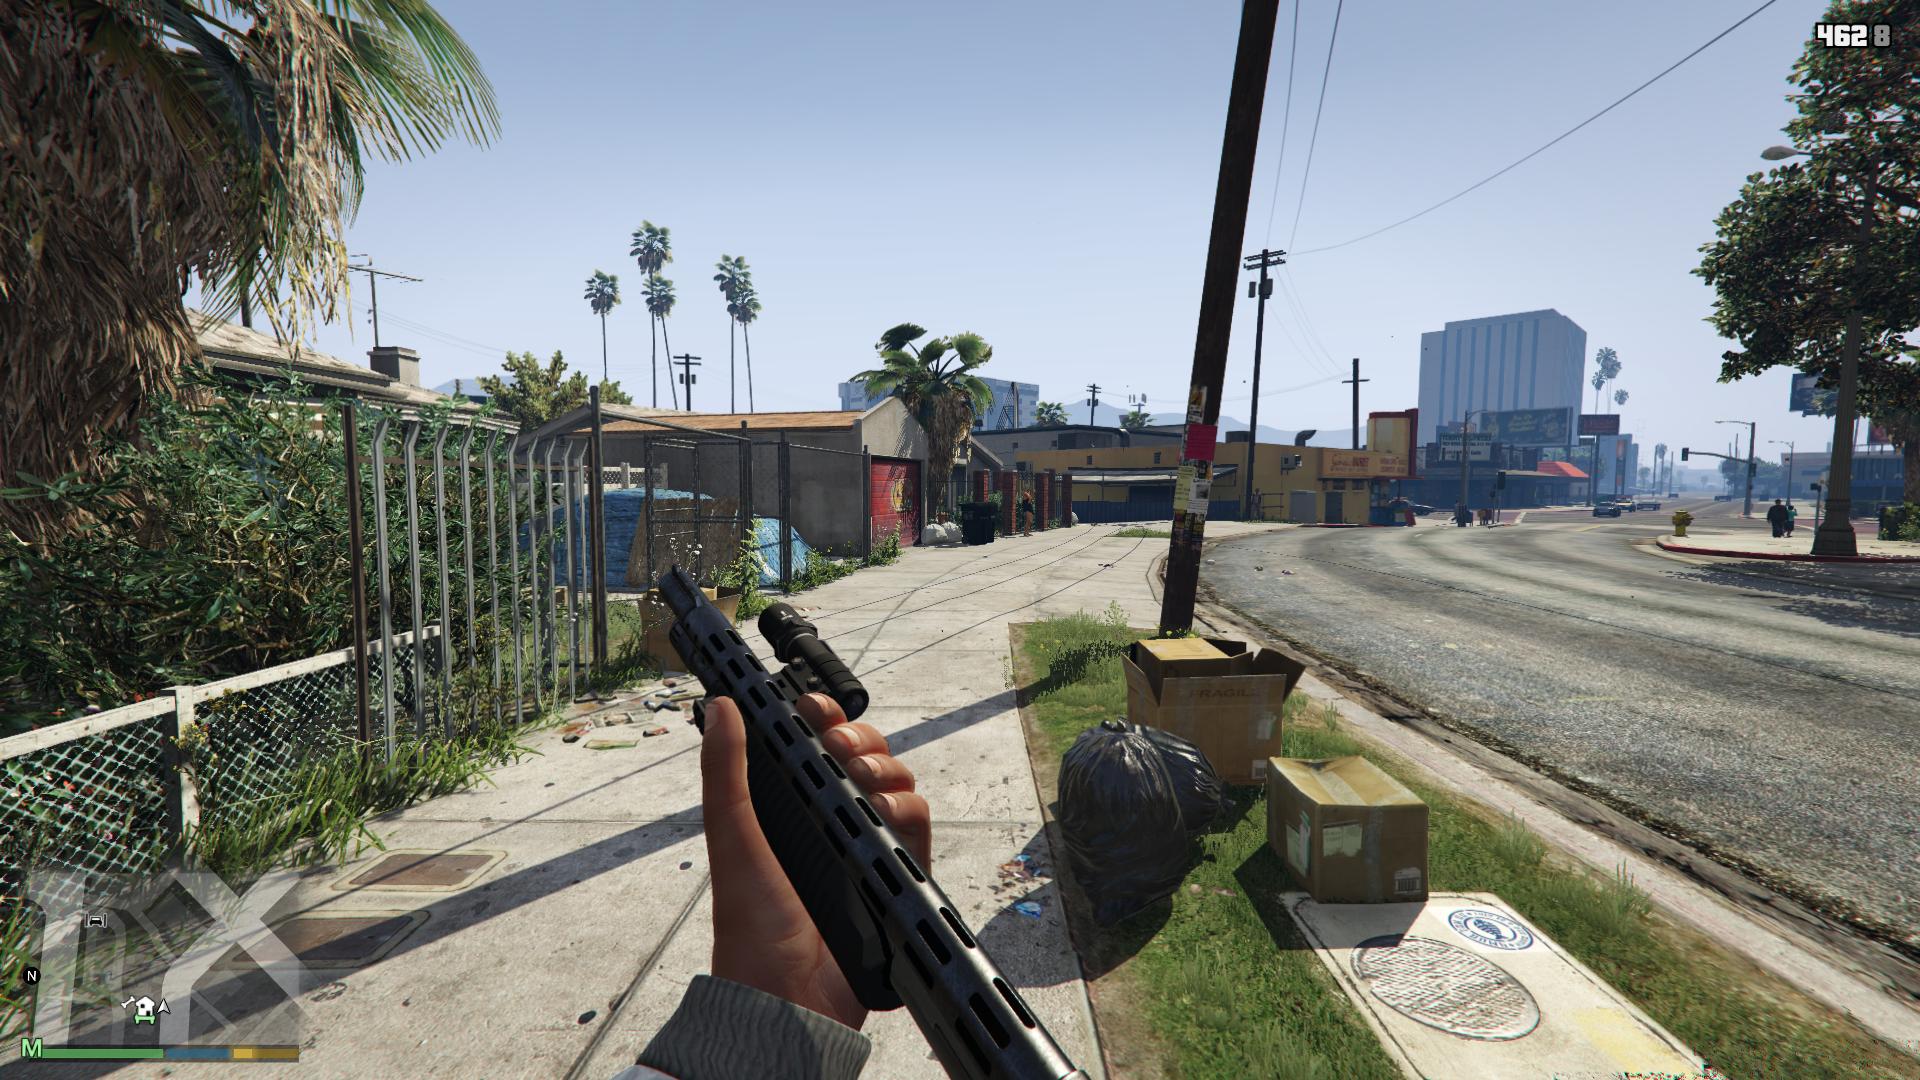 GTA V First-Person Shooter (FPS) Mod Created (video)